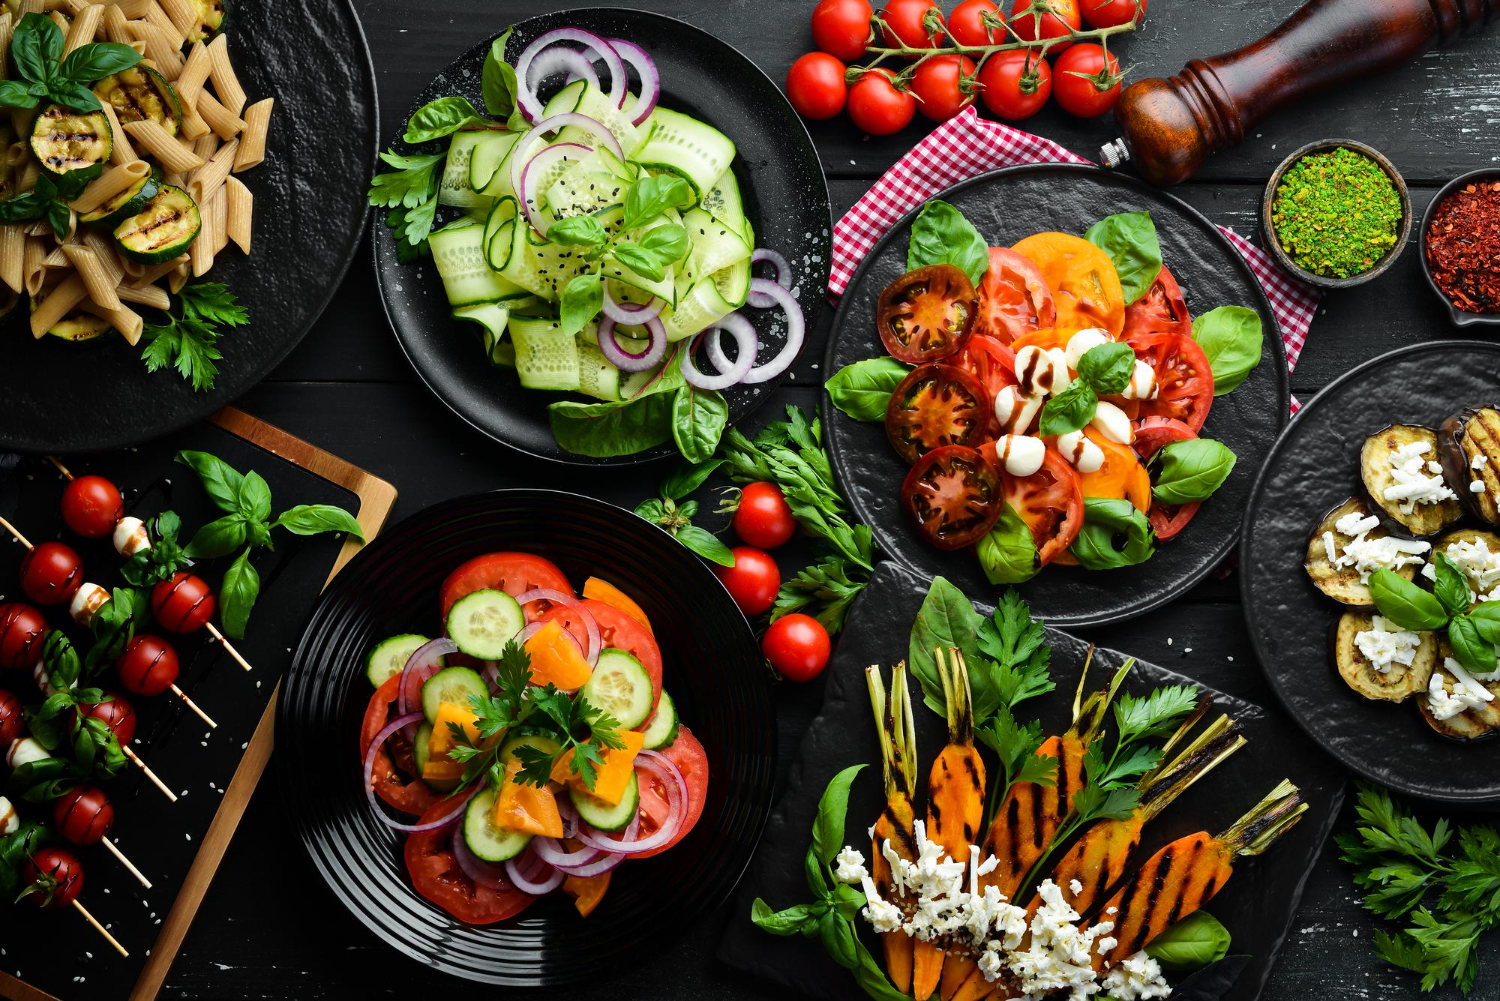 Experts issue health warning to meat-eaters signing up for Veganuary 2024 If you're considering turning plant-based for Veganuary 2024, you should read this first.